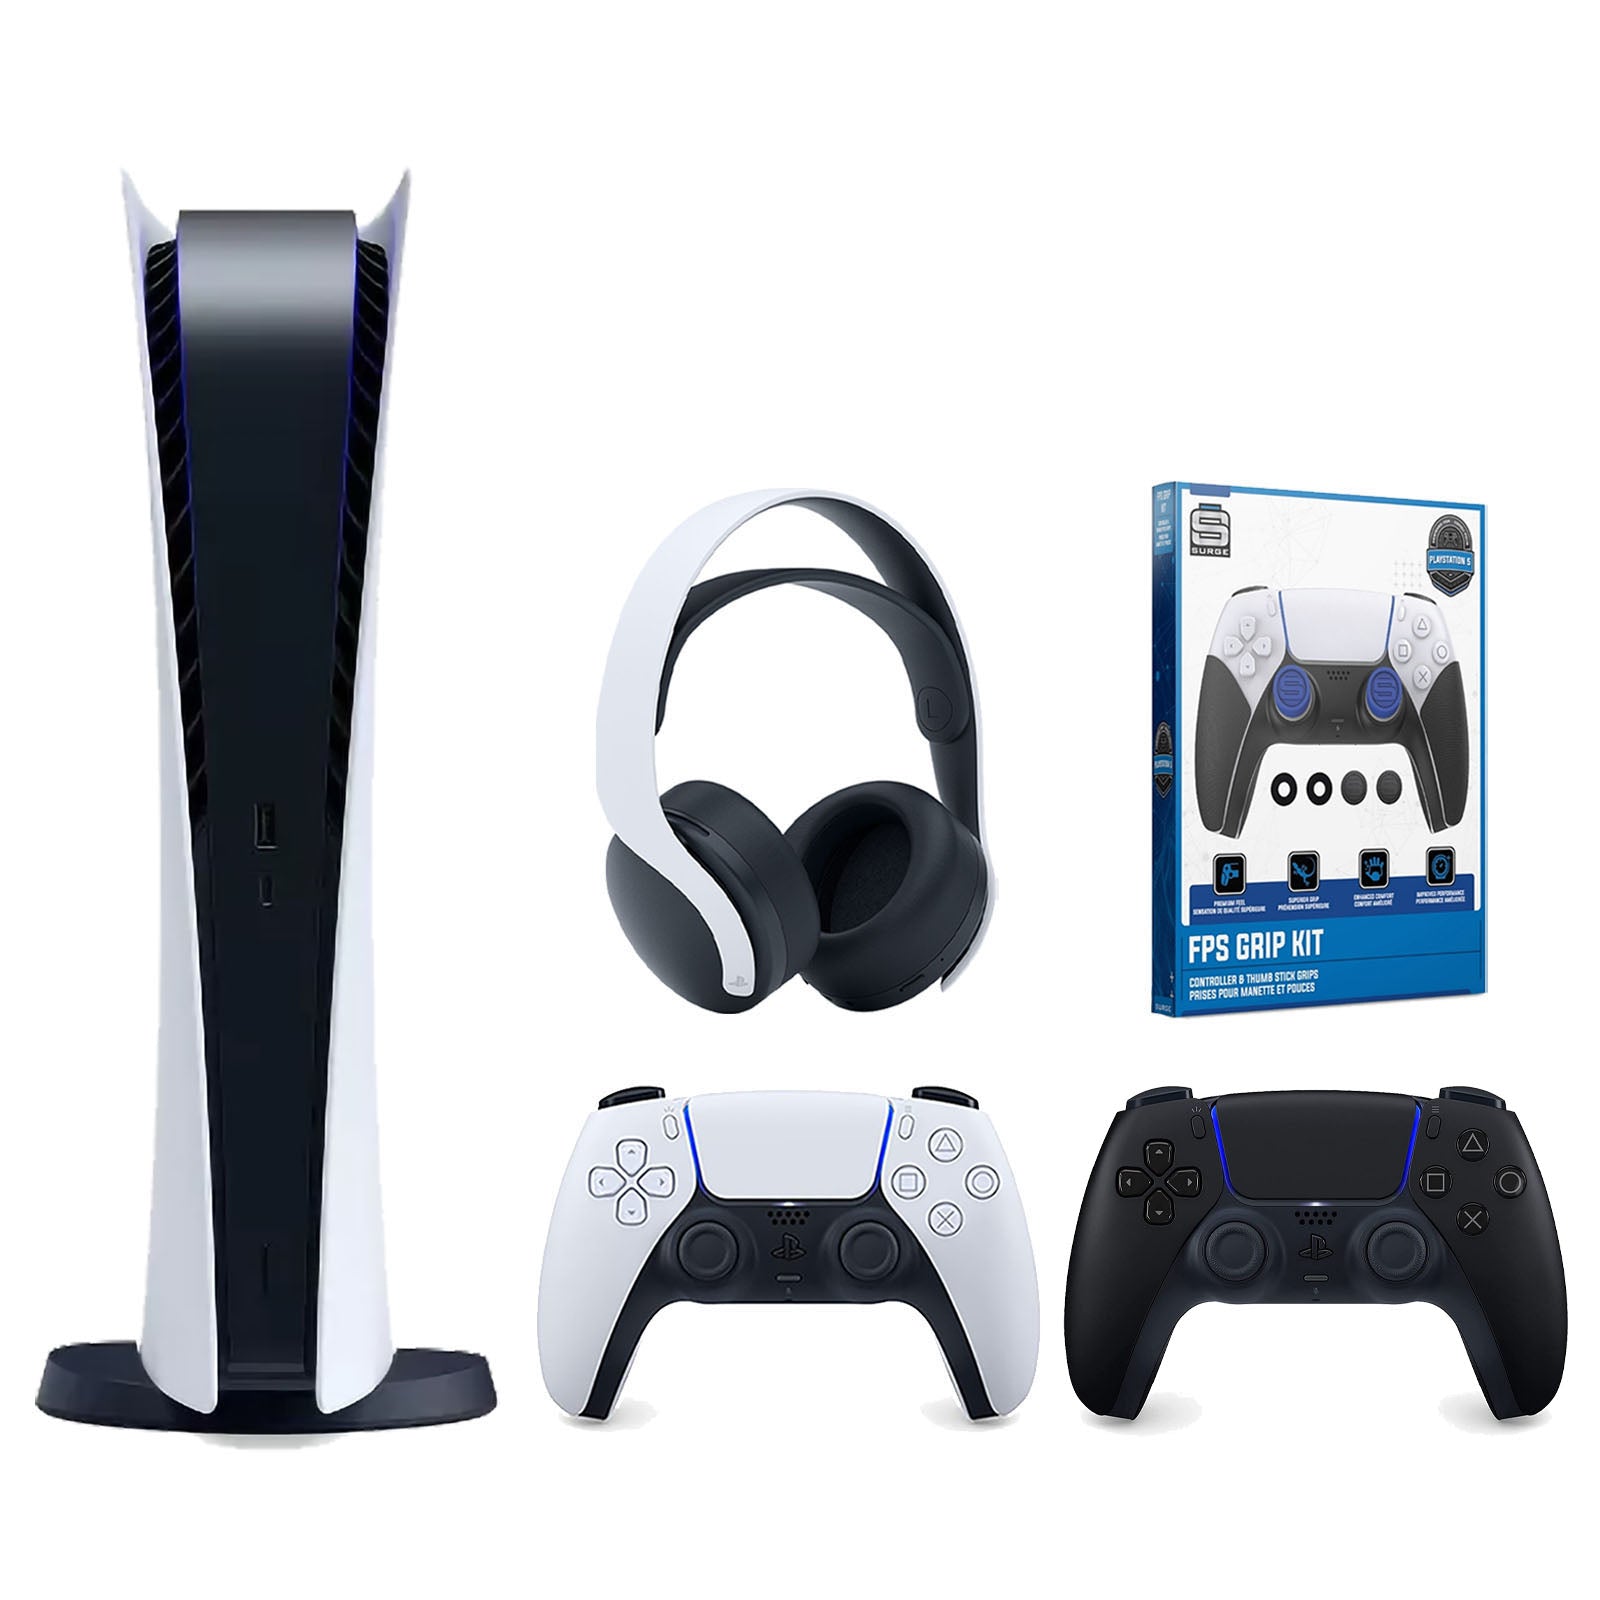 Sony Playstation 5 Digital Edition Console with Extra Black Controller, White PULSE 3D Headset and Surge FPS Grip Kit With Precision Aiming Rings Bundle - Pro-Distributing